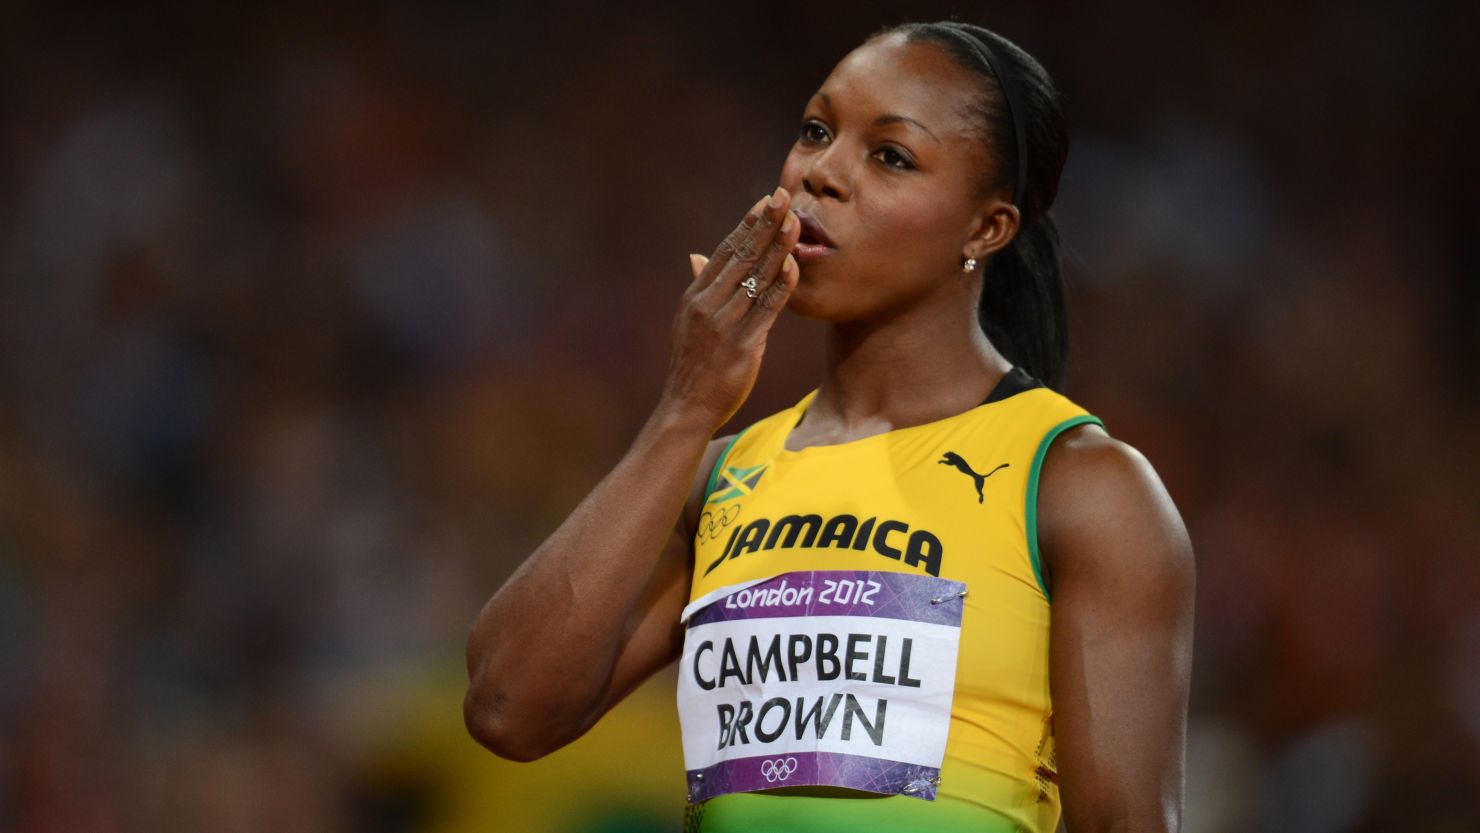 Jamaica's Veronica Campbell-Brown sprinted to Olympic bronze at the London 2012 Games.